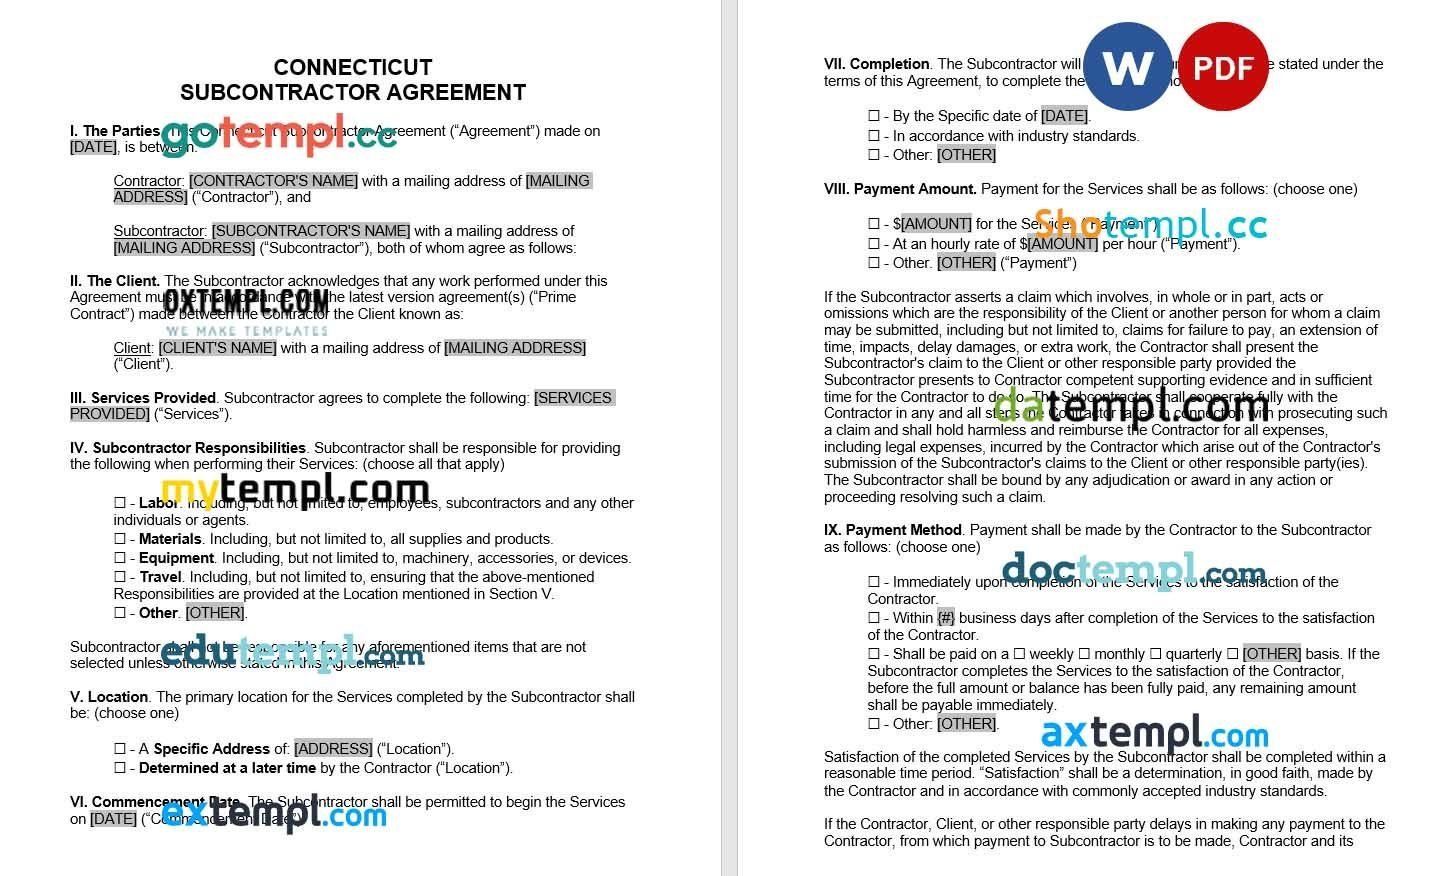 Connecticut Subcontractor Agreement Word example, fully editable